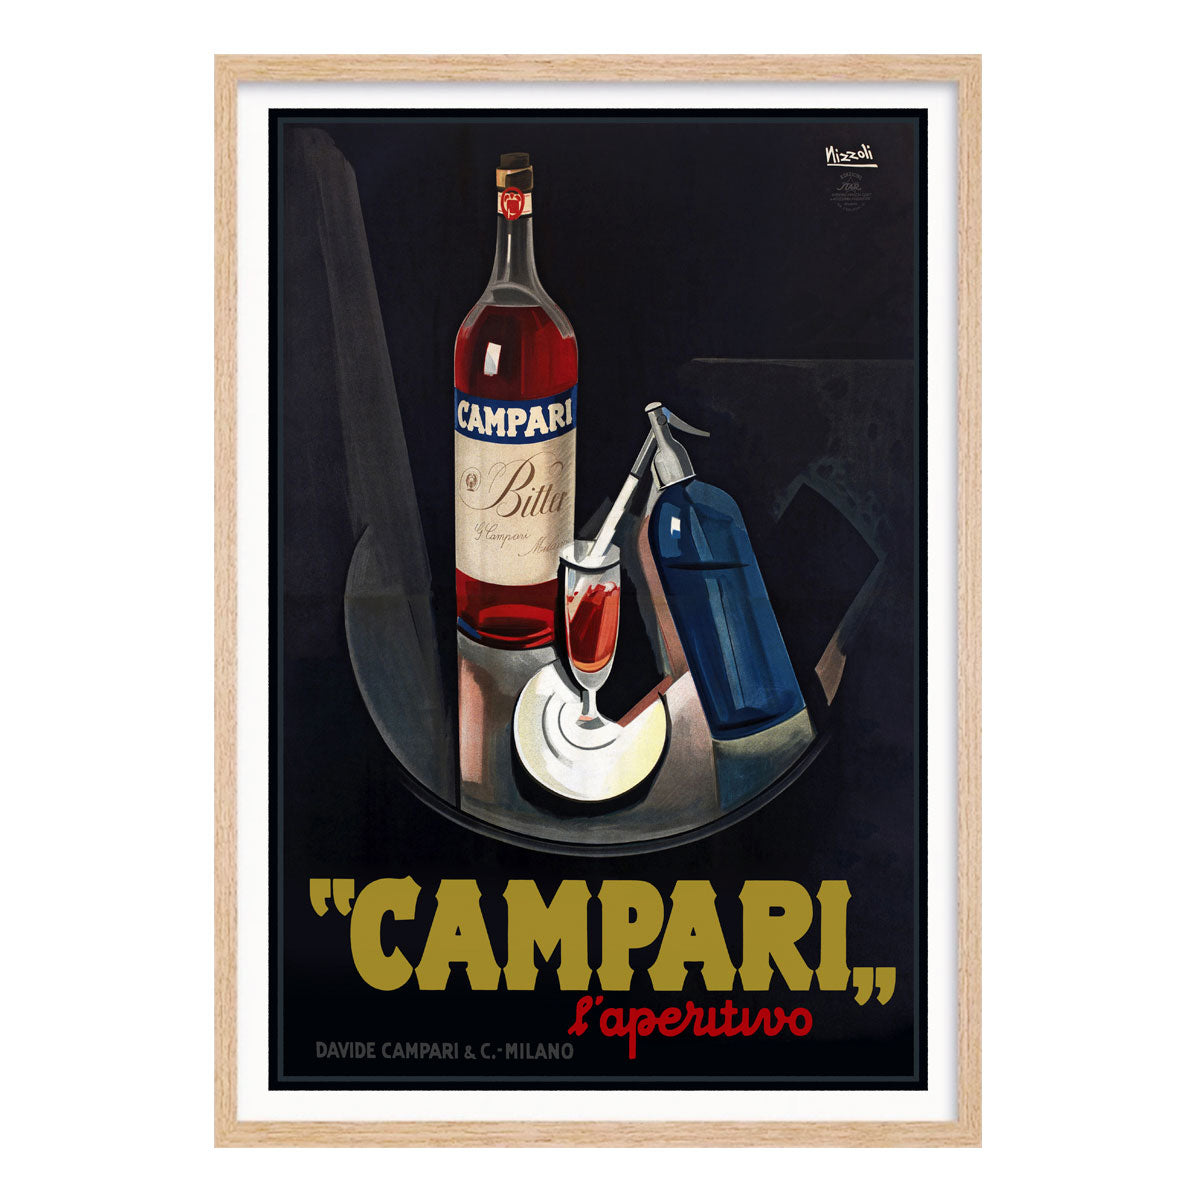 Campari l'aperitivo retro vintage poster print in oak frame from Paces We Luv